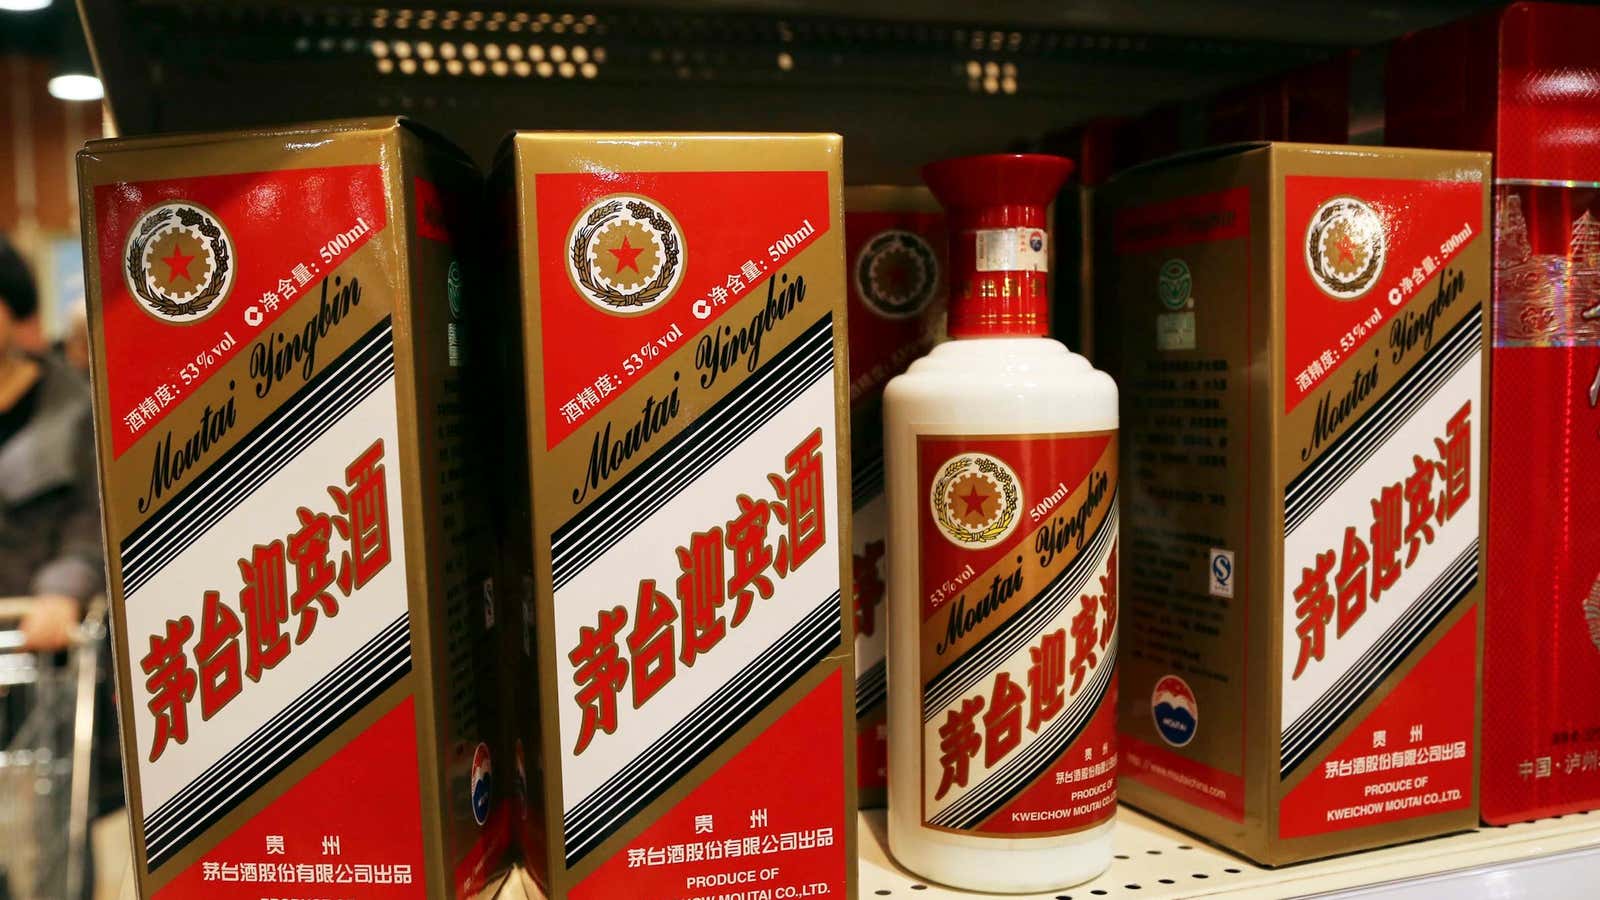 One of many baijiu brands for sale in China—which are undercutting Diageo’s big bet.